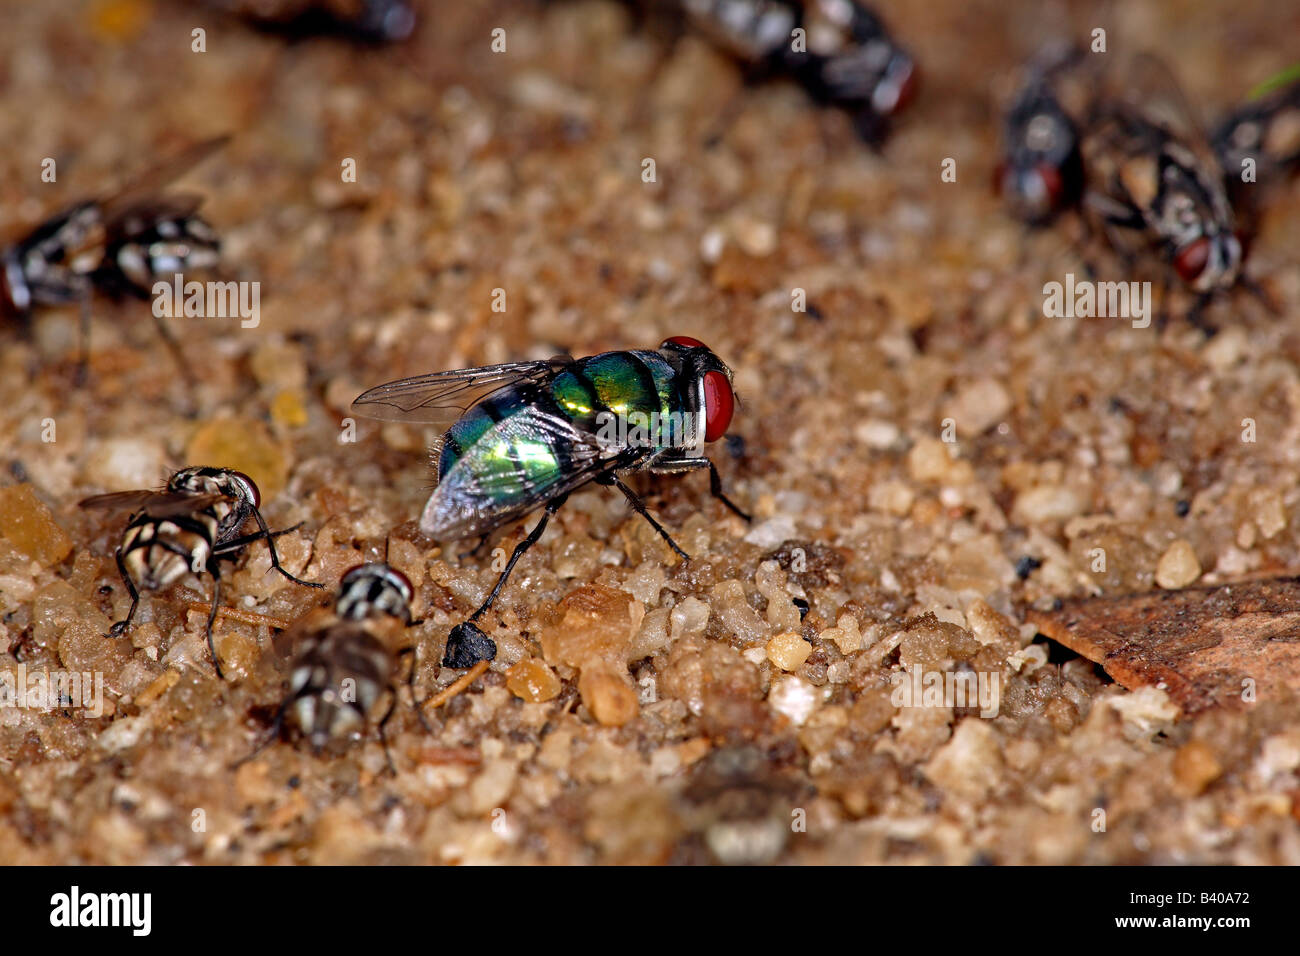 A metallic green Blowfly (family Calliphoridae) with bright red eyes gathers with other flies on fertilizer fertiliser Australia Stock Photo